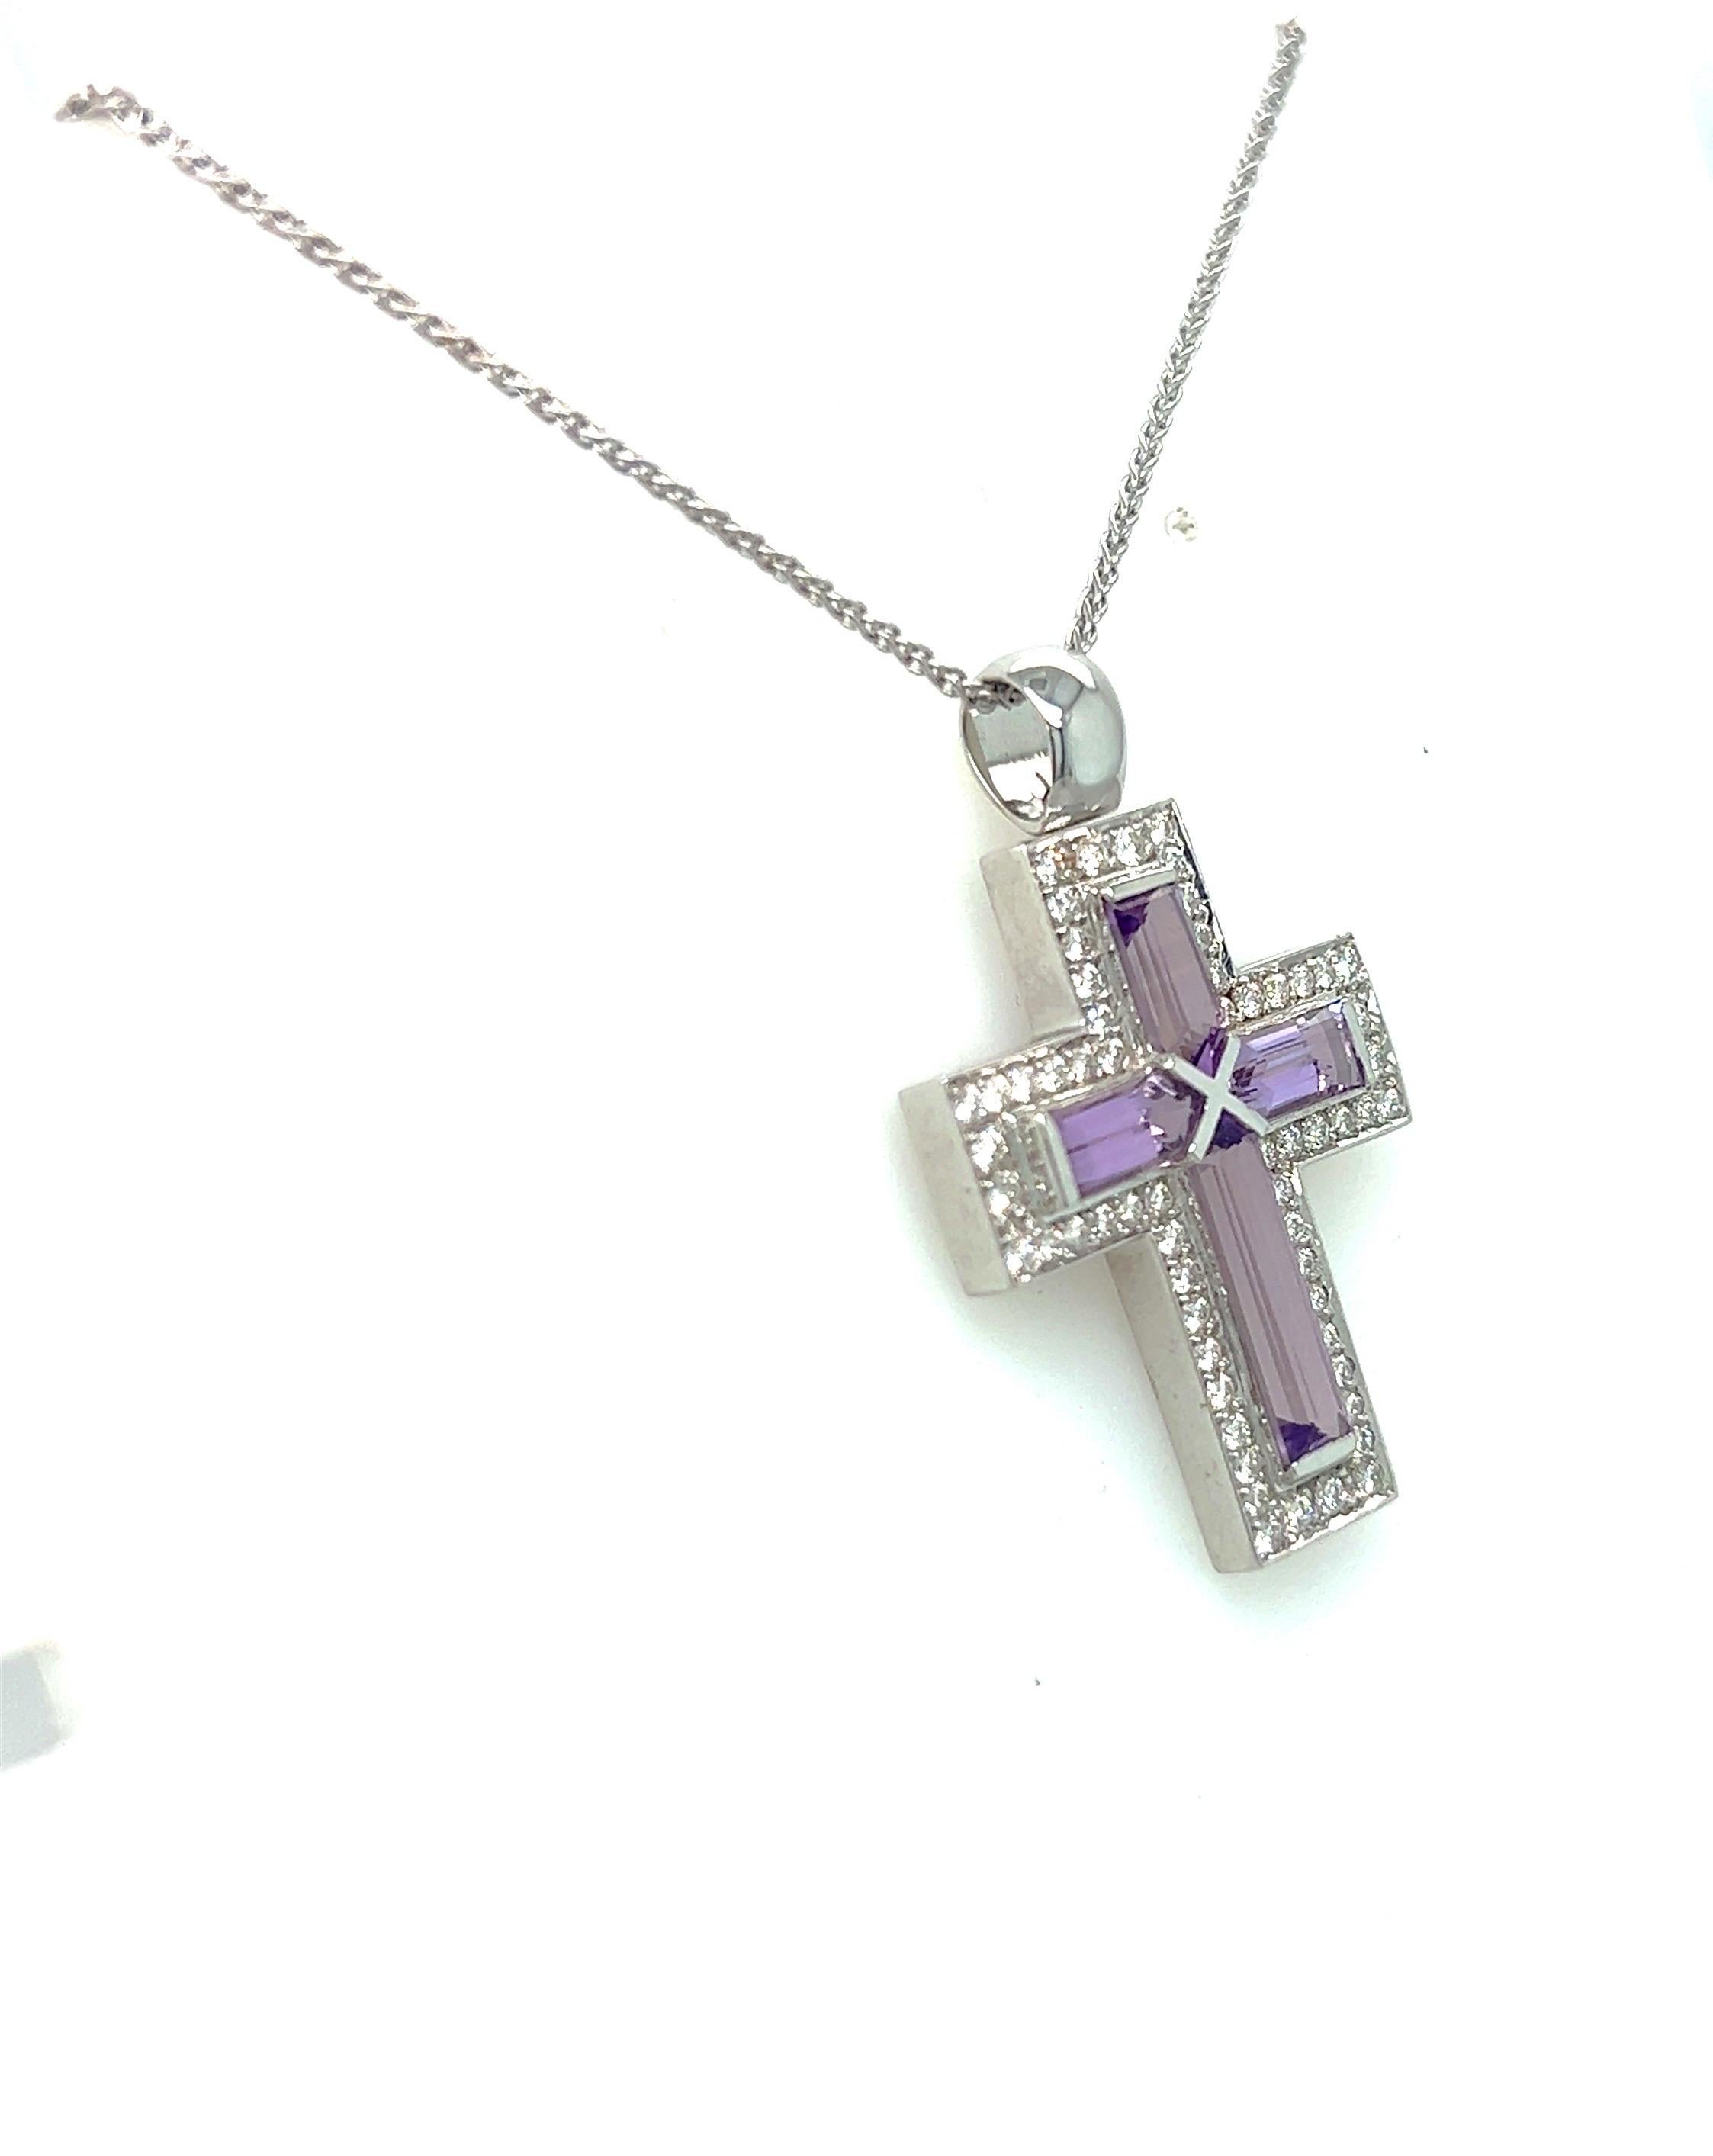 Beautiful 18 Karat white gold cross pendant necklace. The cross is beautifully set with 4 very long Amethyst Baguettes. Round Brilliant Diamonds border the Amethysts. The cross is 1-3/8